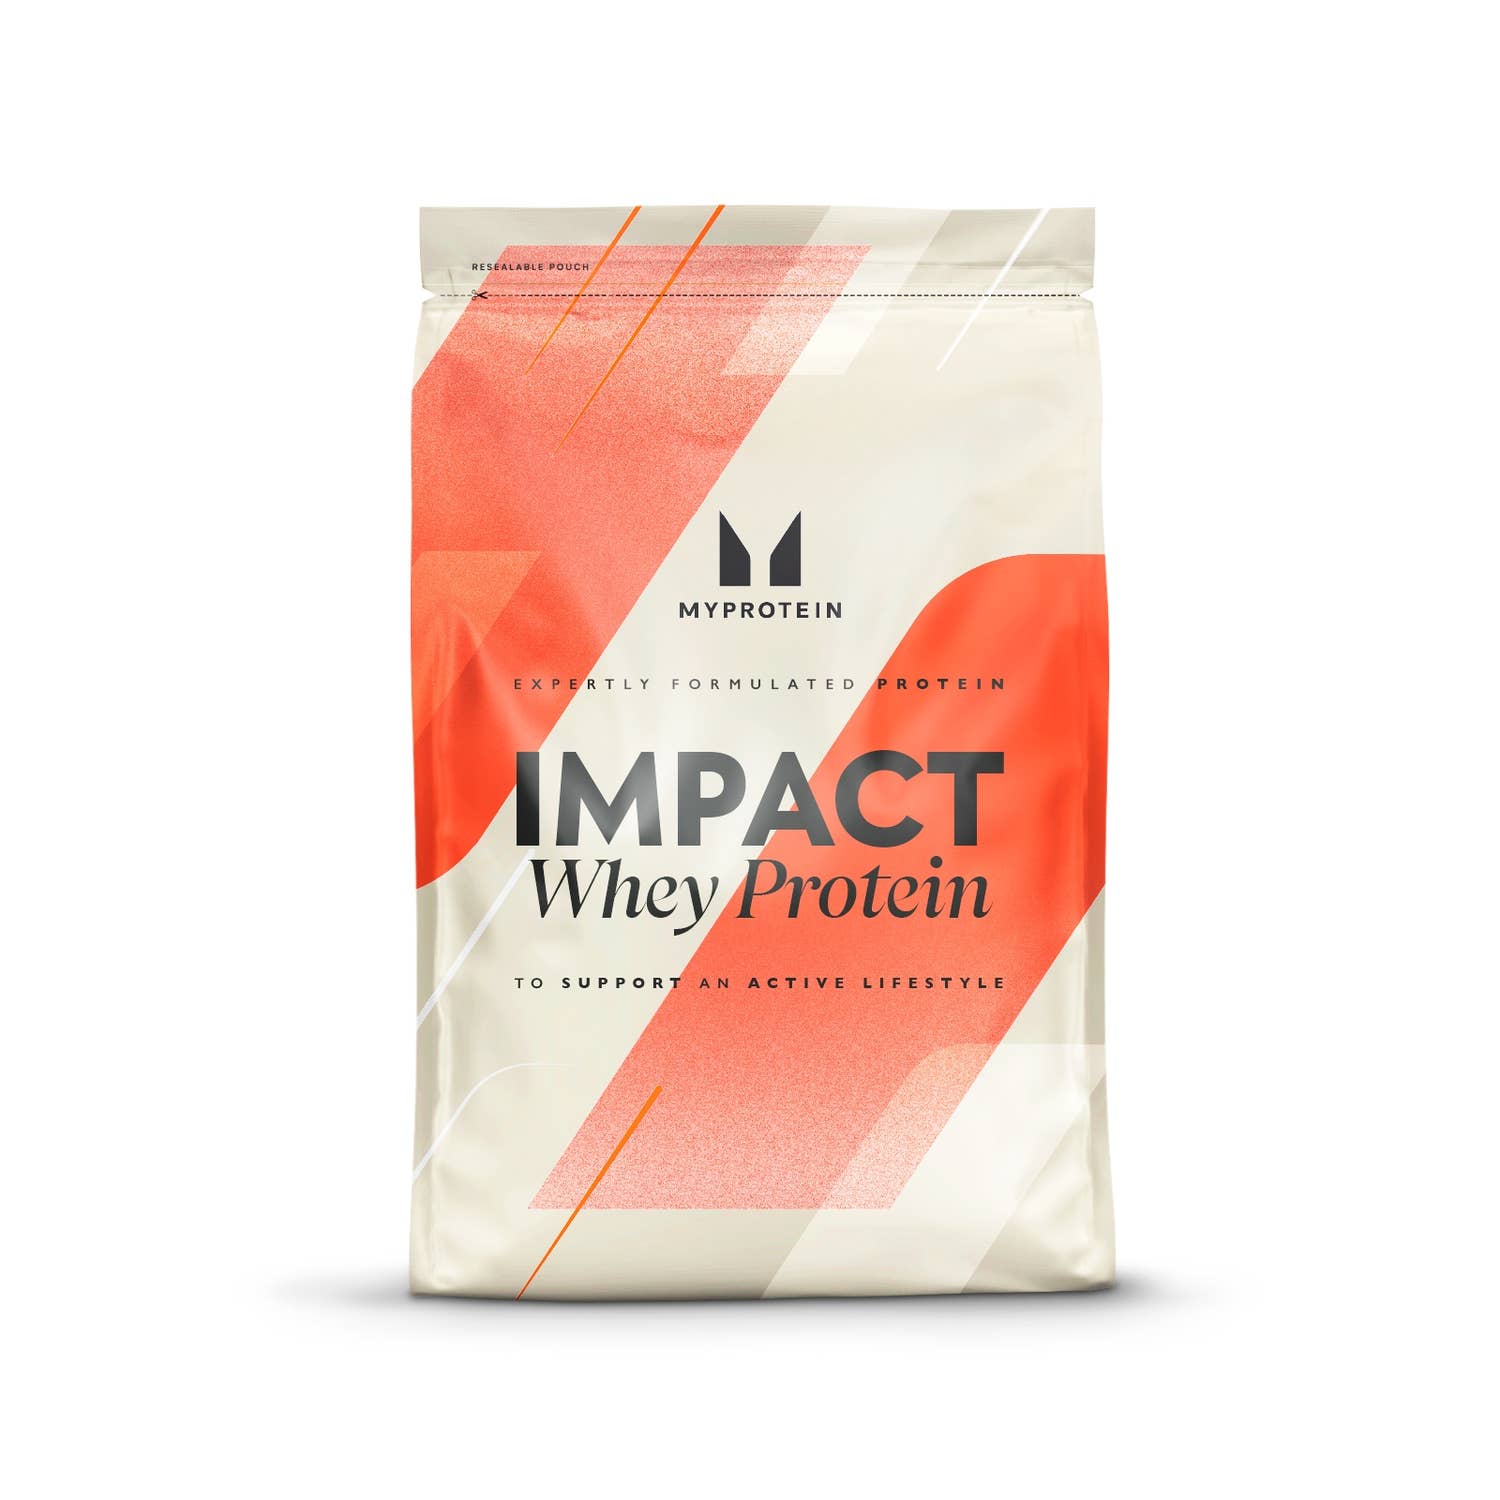 MyProtein Impact Whey Protein $35 for 5.5lbs